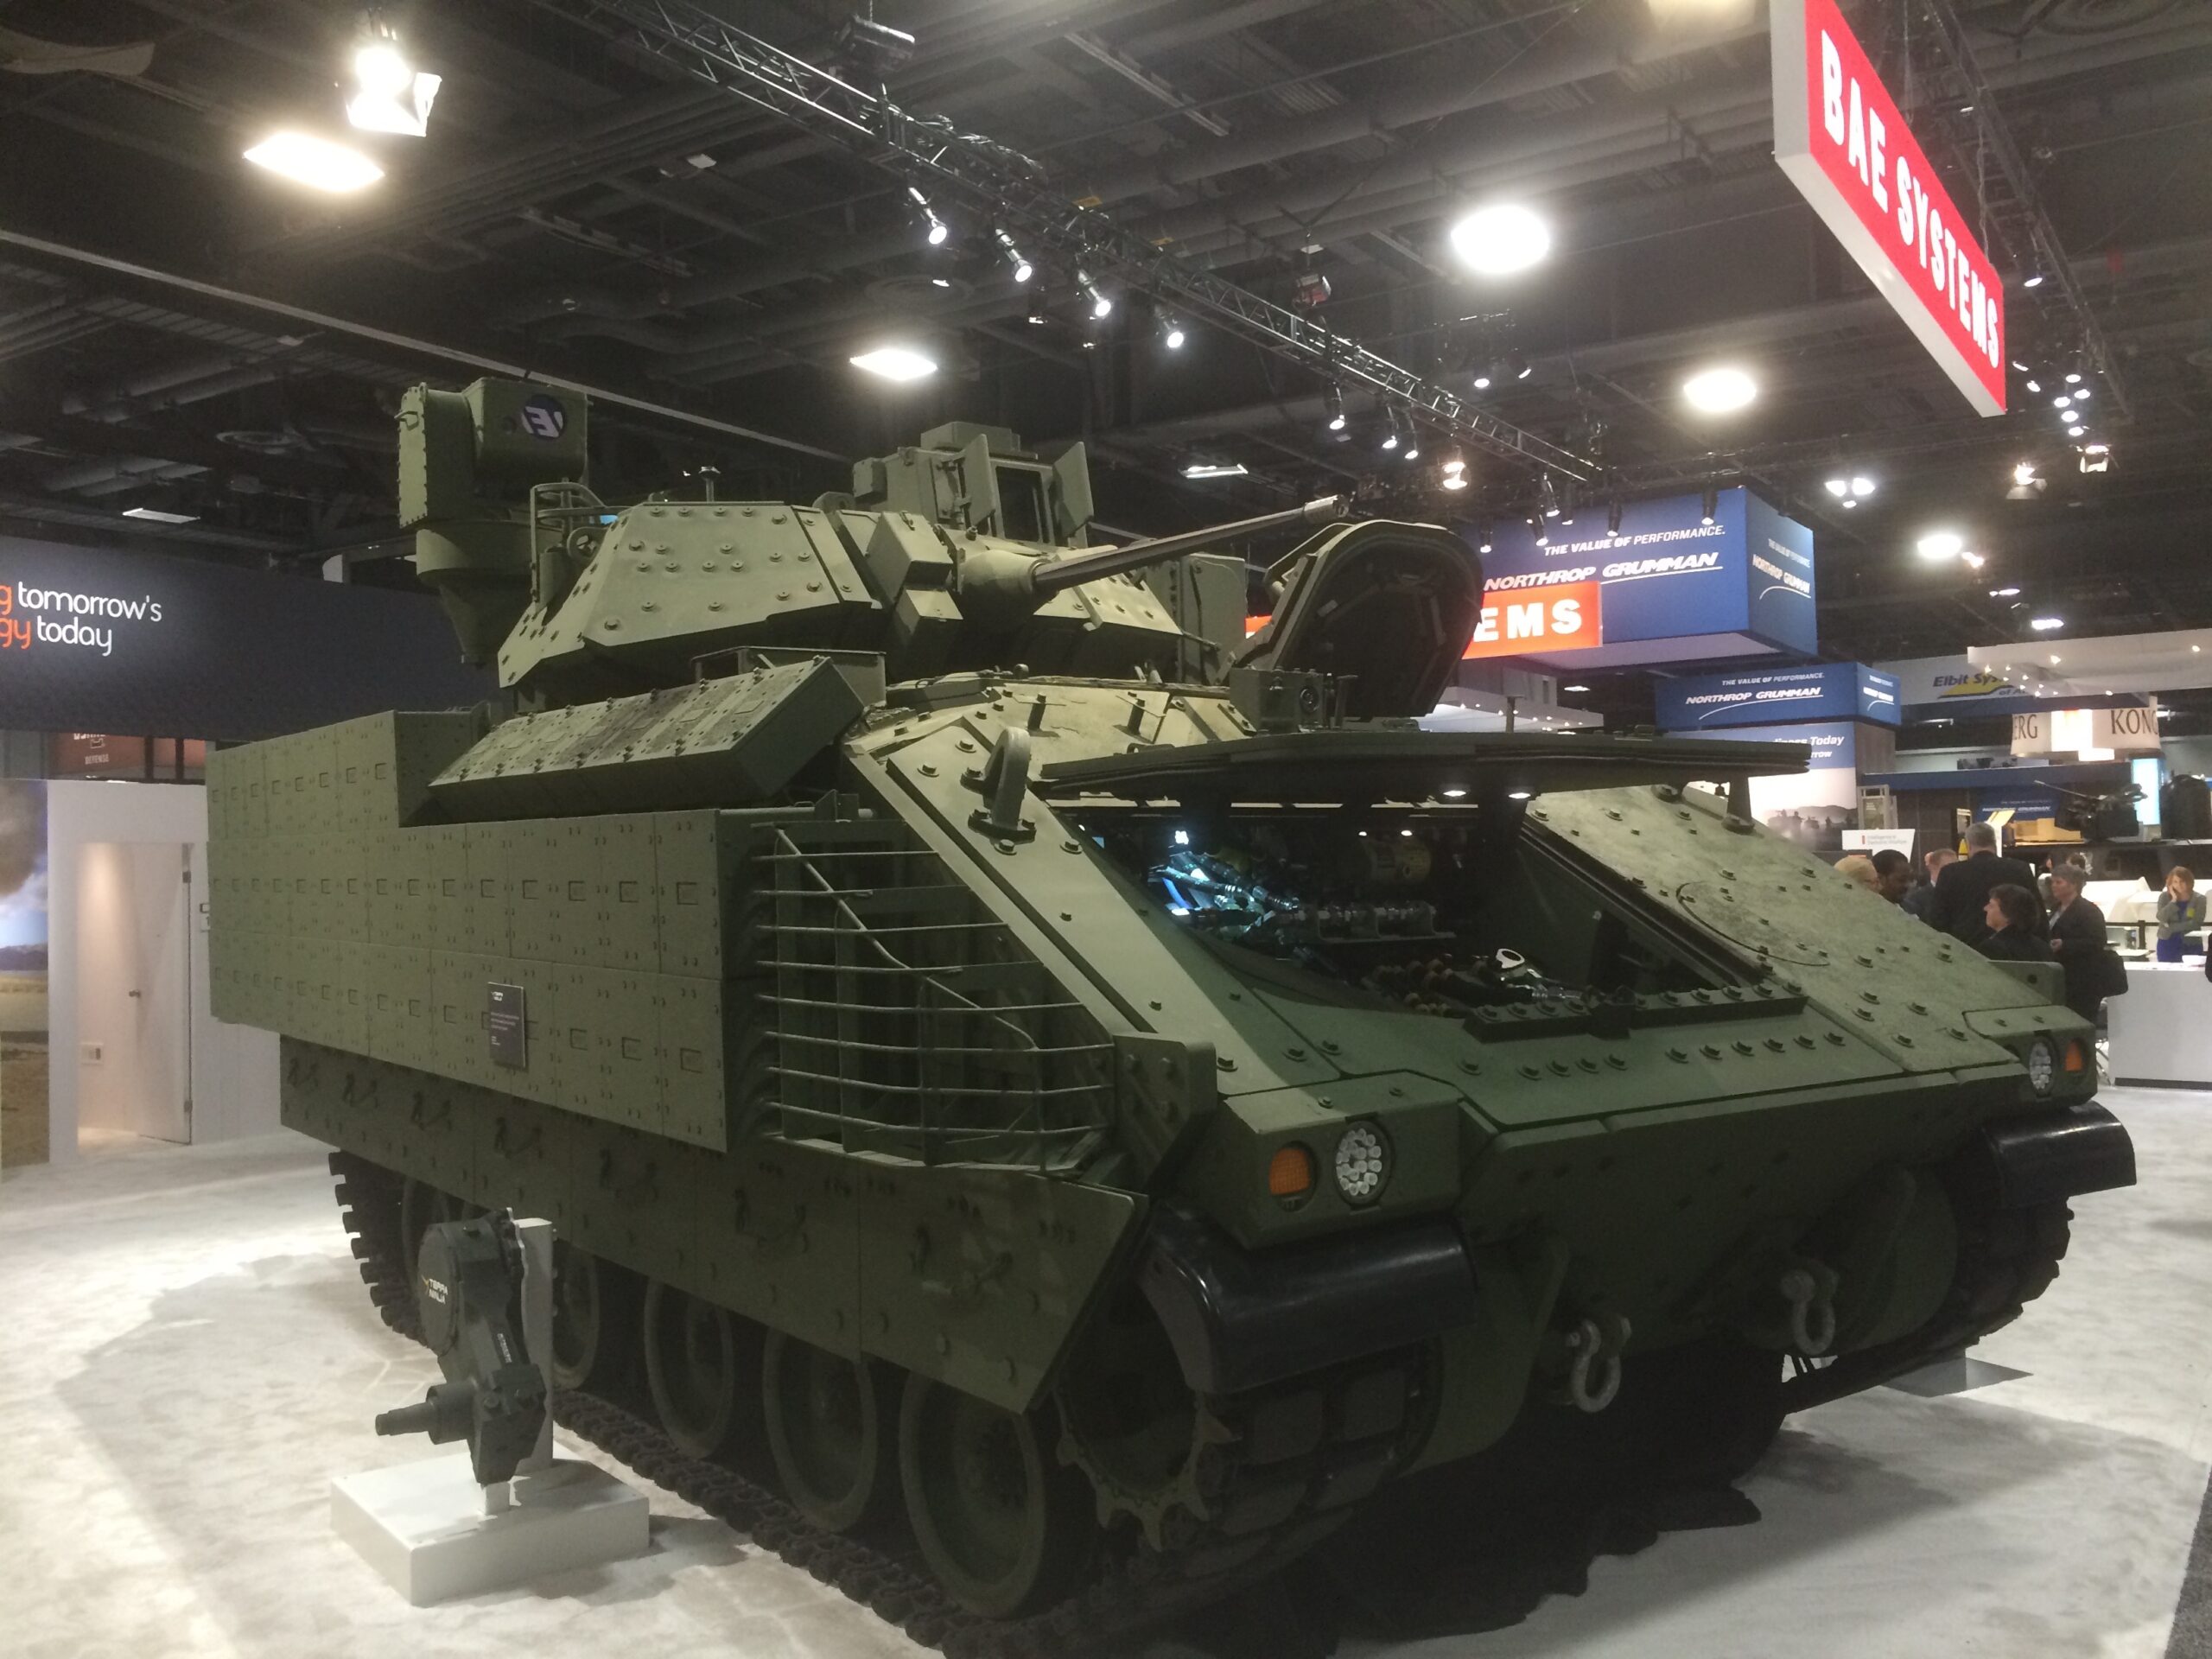 Rebuilding The M2 Bradley: Same A4 Turret But Most Is New